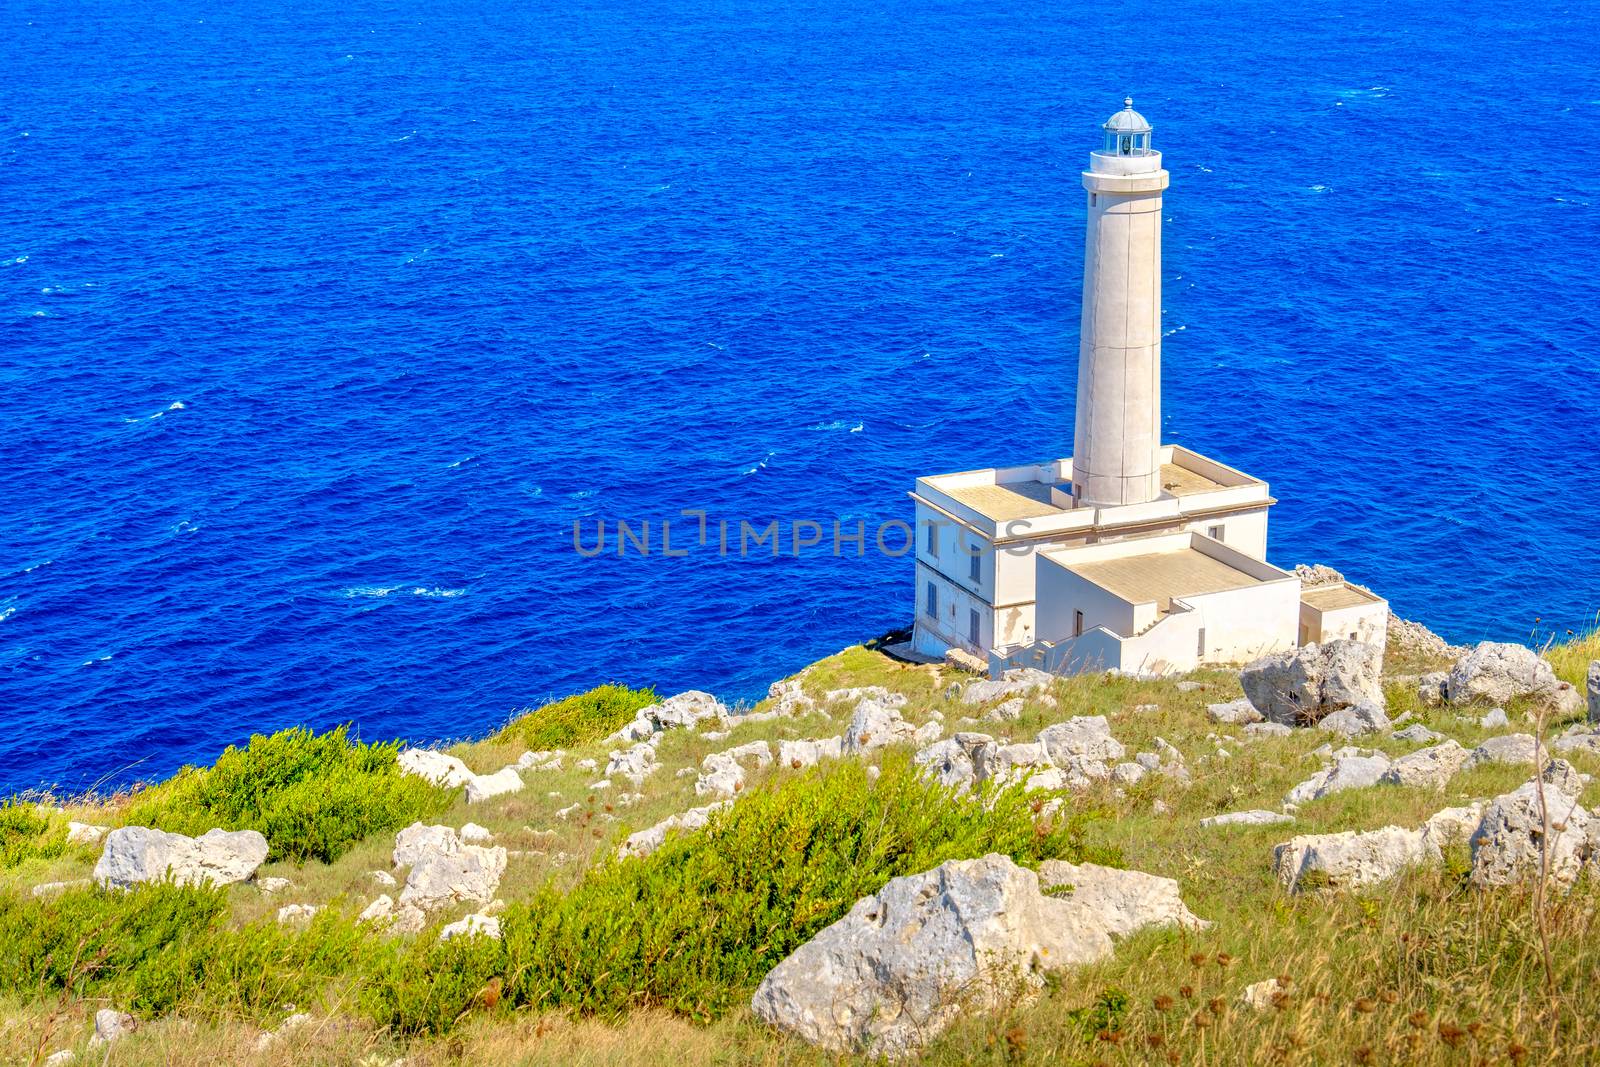 The Punta Palascia (Cape Palascia) lighthouse in Apulia is the most eastern point of Italy